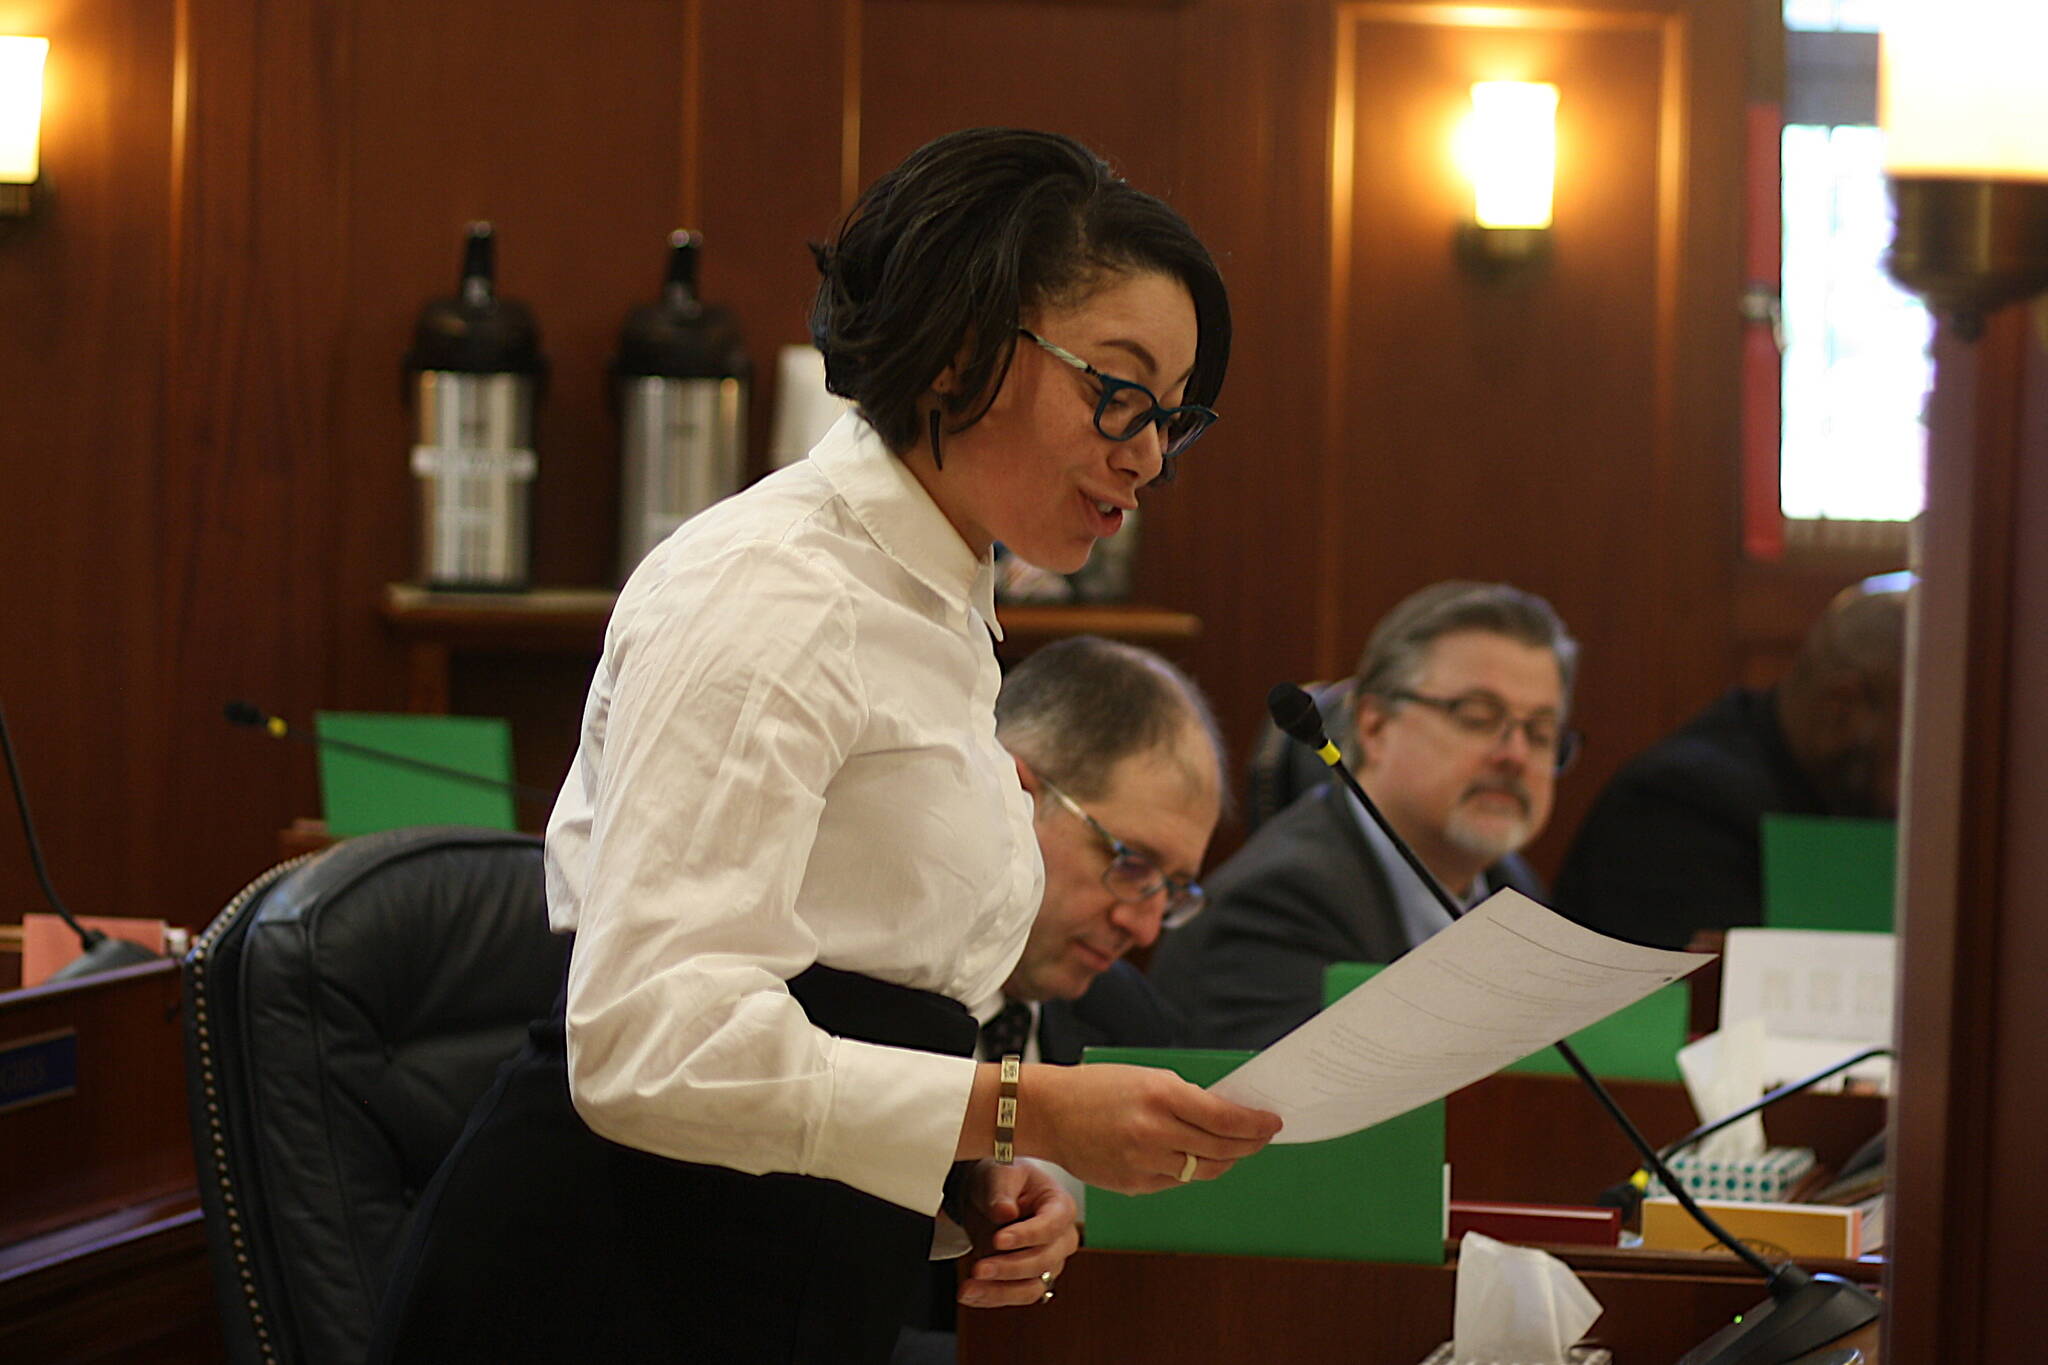 State Sen. Löki Tobin, D-Anchorage, reads an announcement during the Senate floor session Wednesday. Tobin, who chairs the Senate Education Committee, emerged as a potential road block to Gov. Mike Dunleavy’s “parental rights” bill by declaring it would not get a hearing if referred to her committee. The bill was subsequently referred to two other committees, with Senate President Gary Stevens, R-Kodiak, stating it will get a public hearing. (Mark Sabbatini / Juneau Empire)